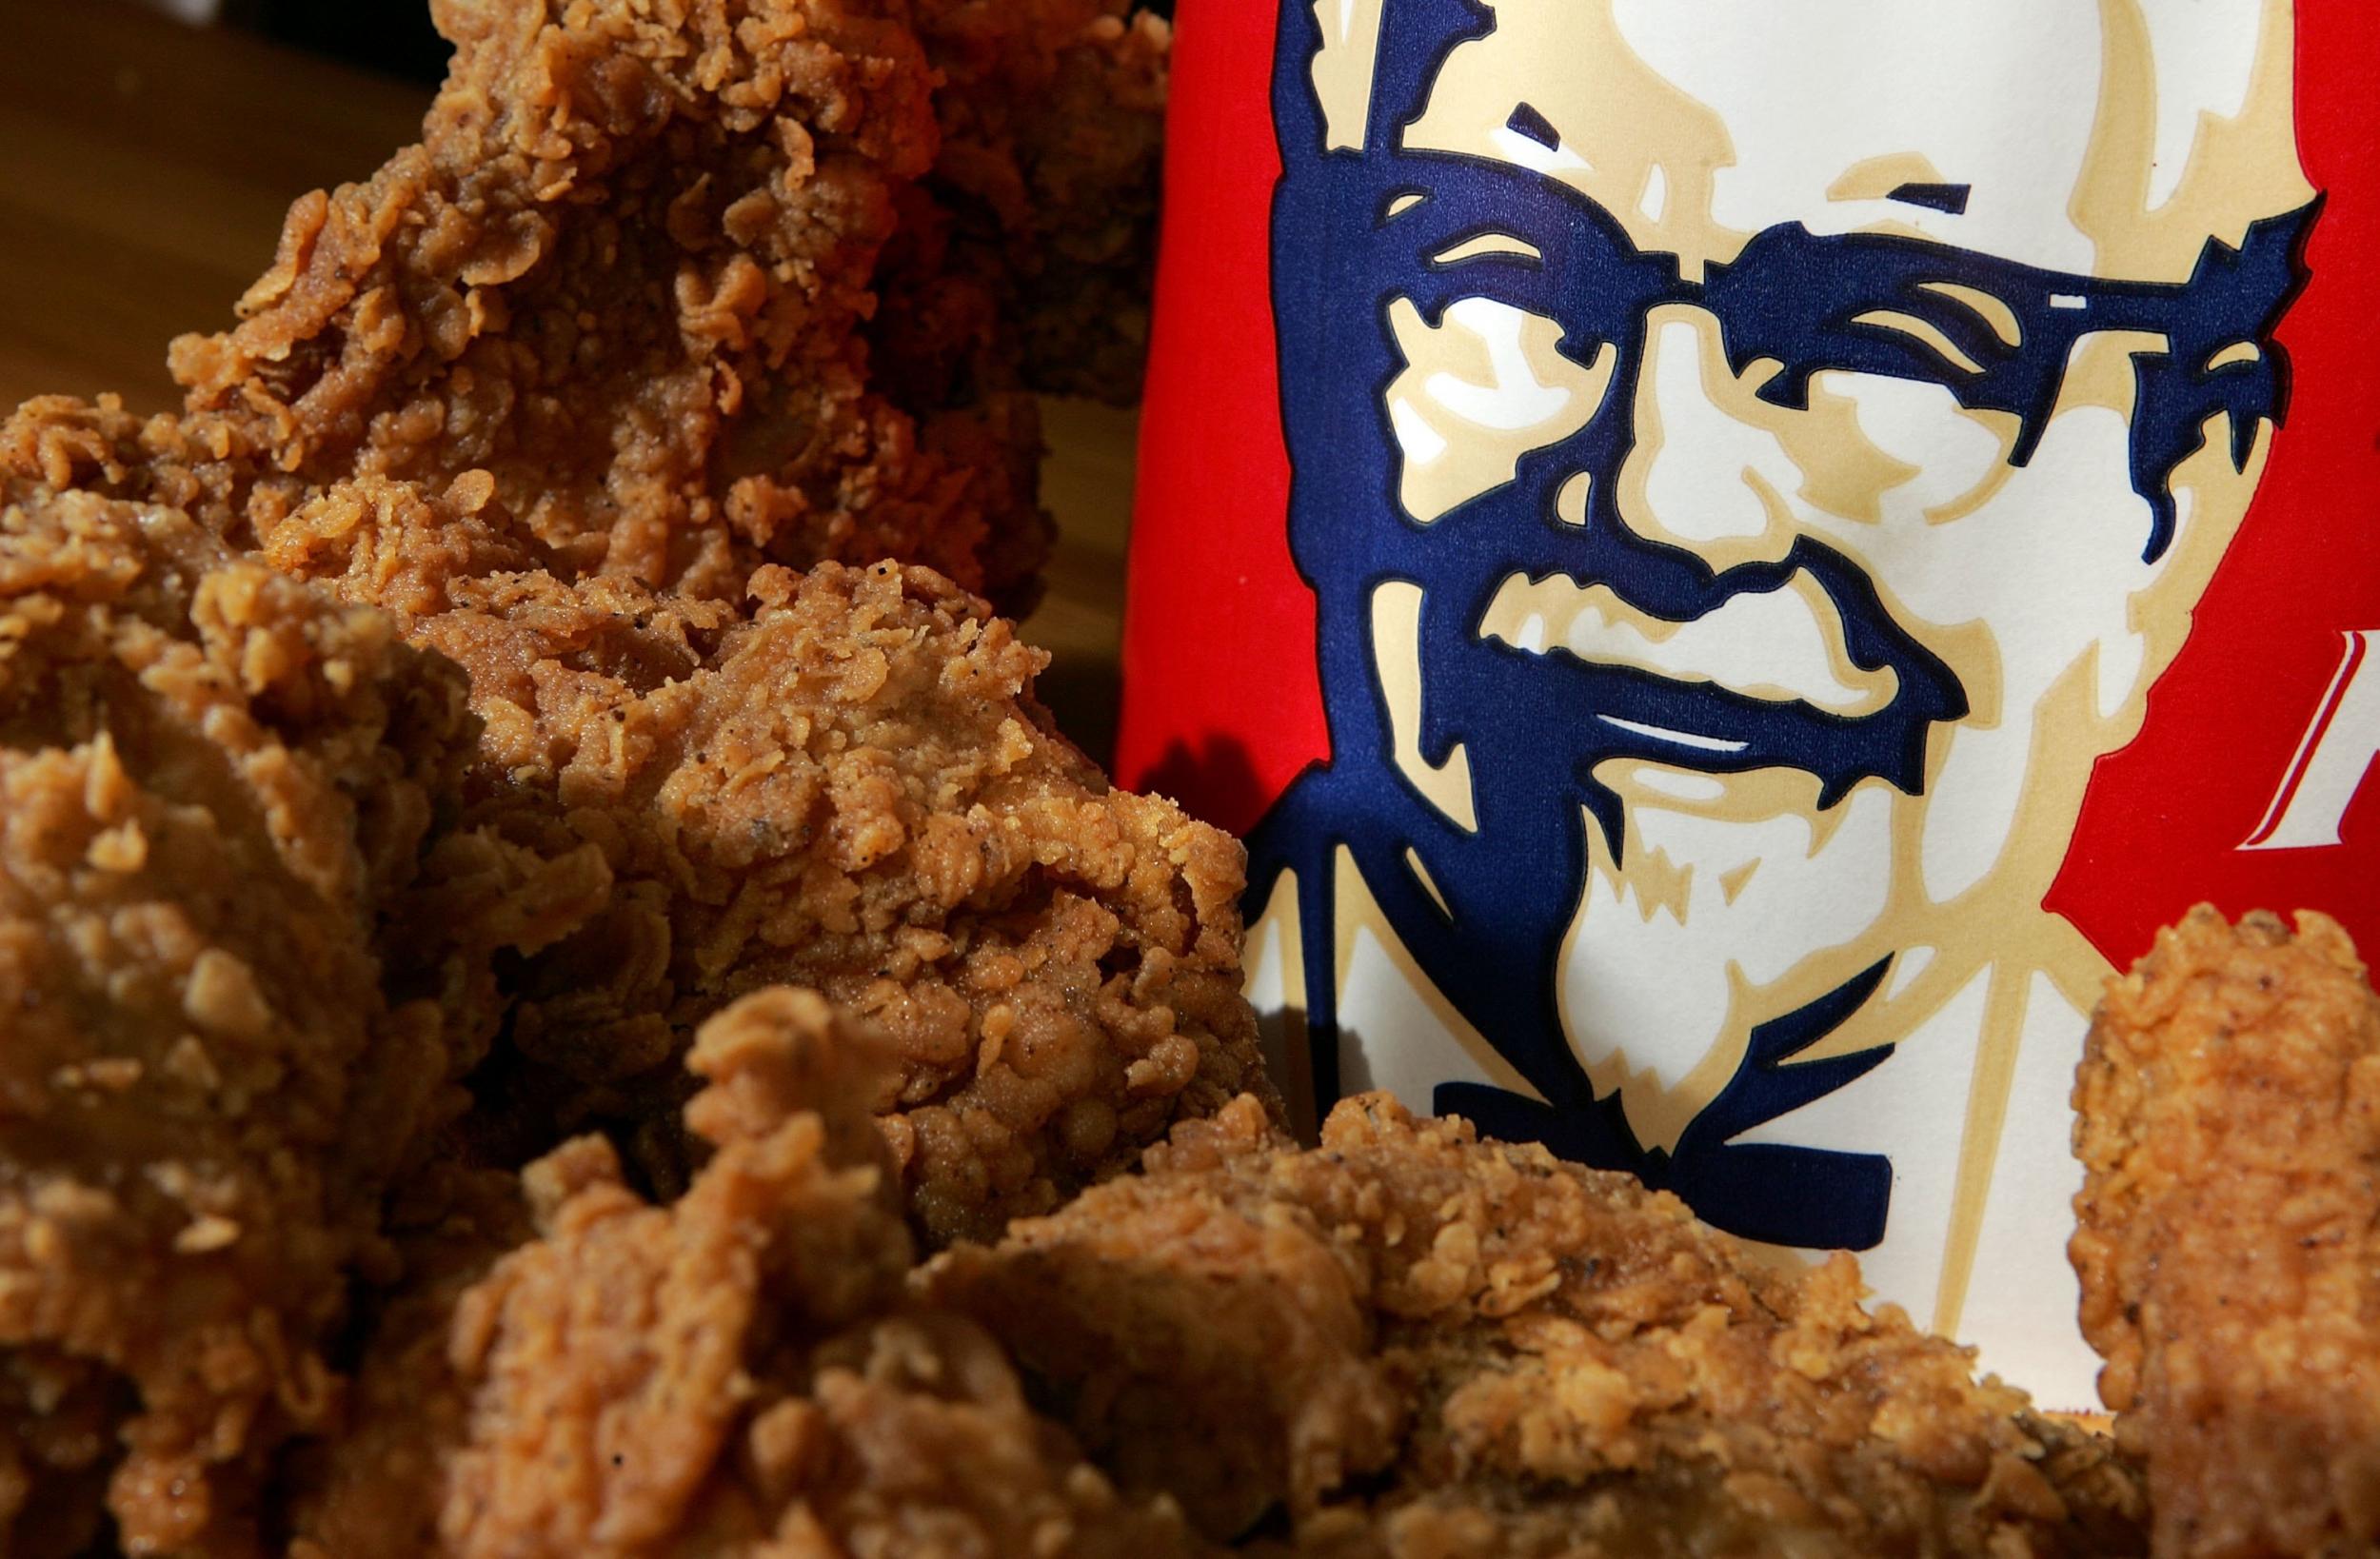 KFC forced to close restaurants after running out of chicken